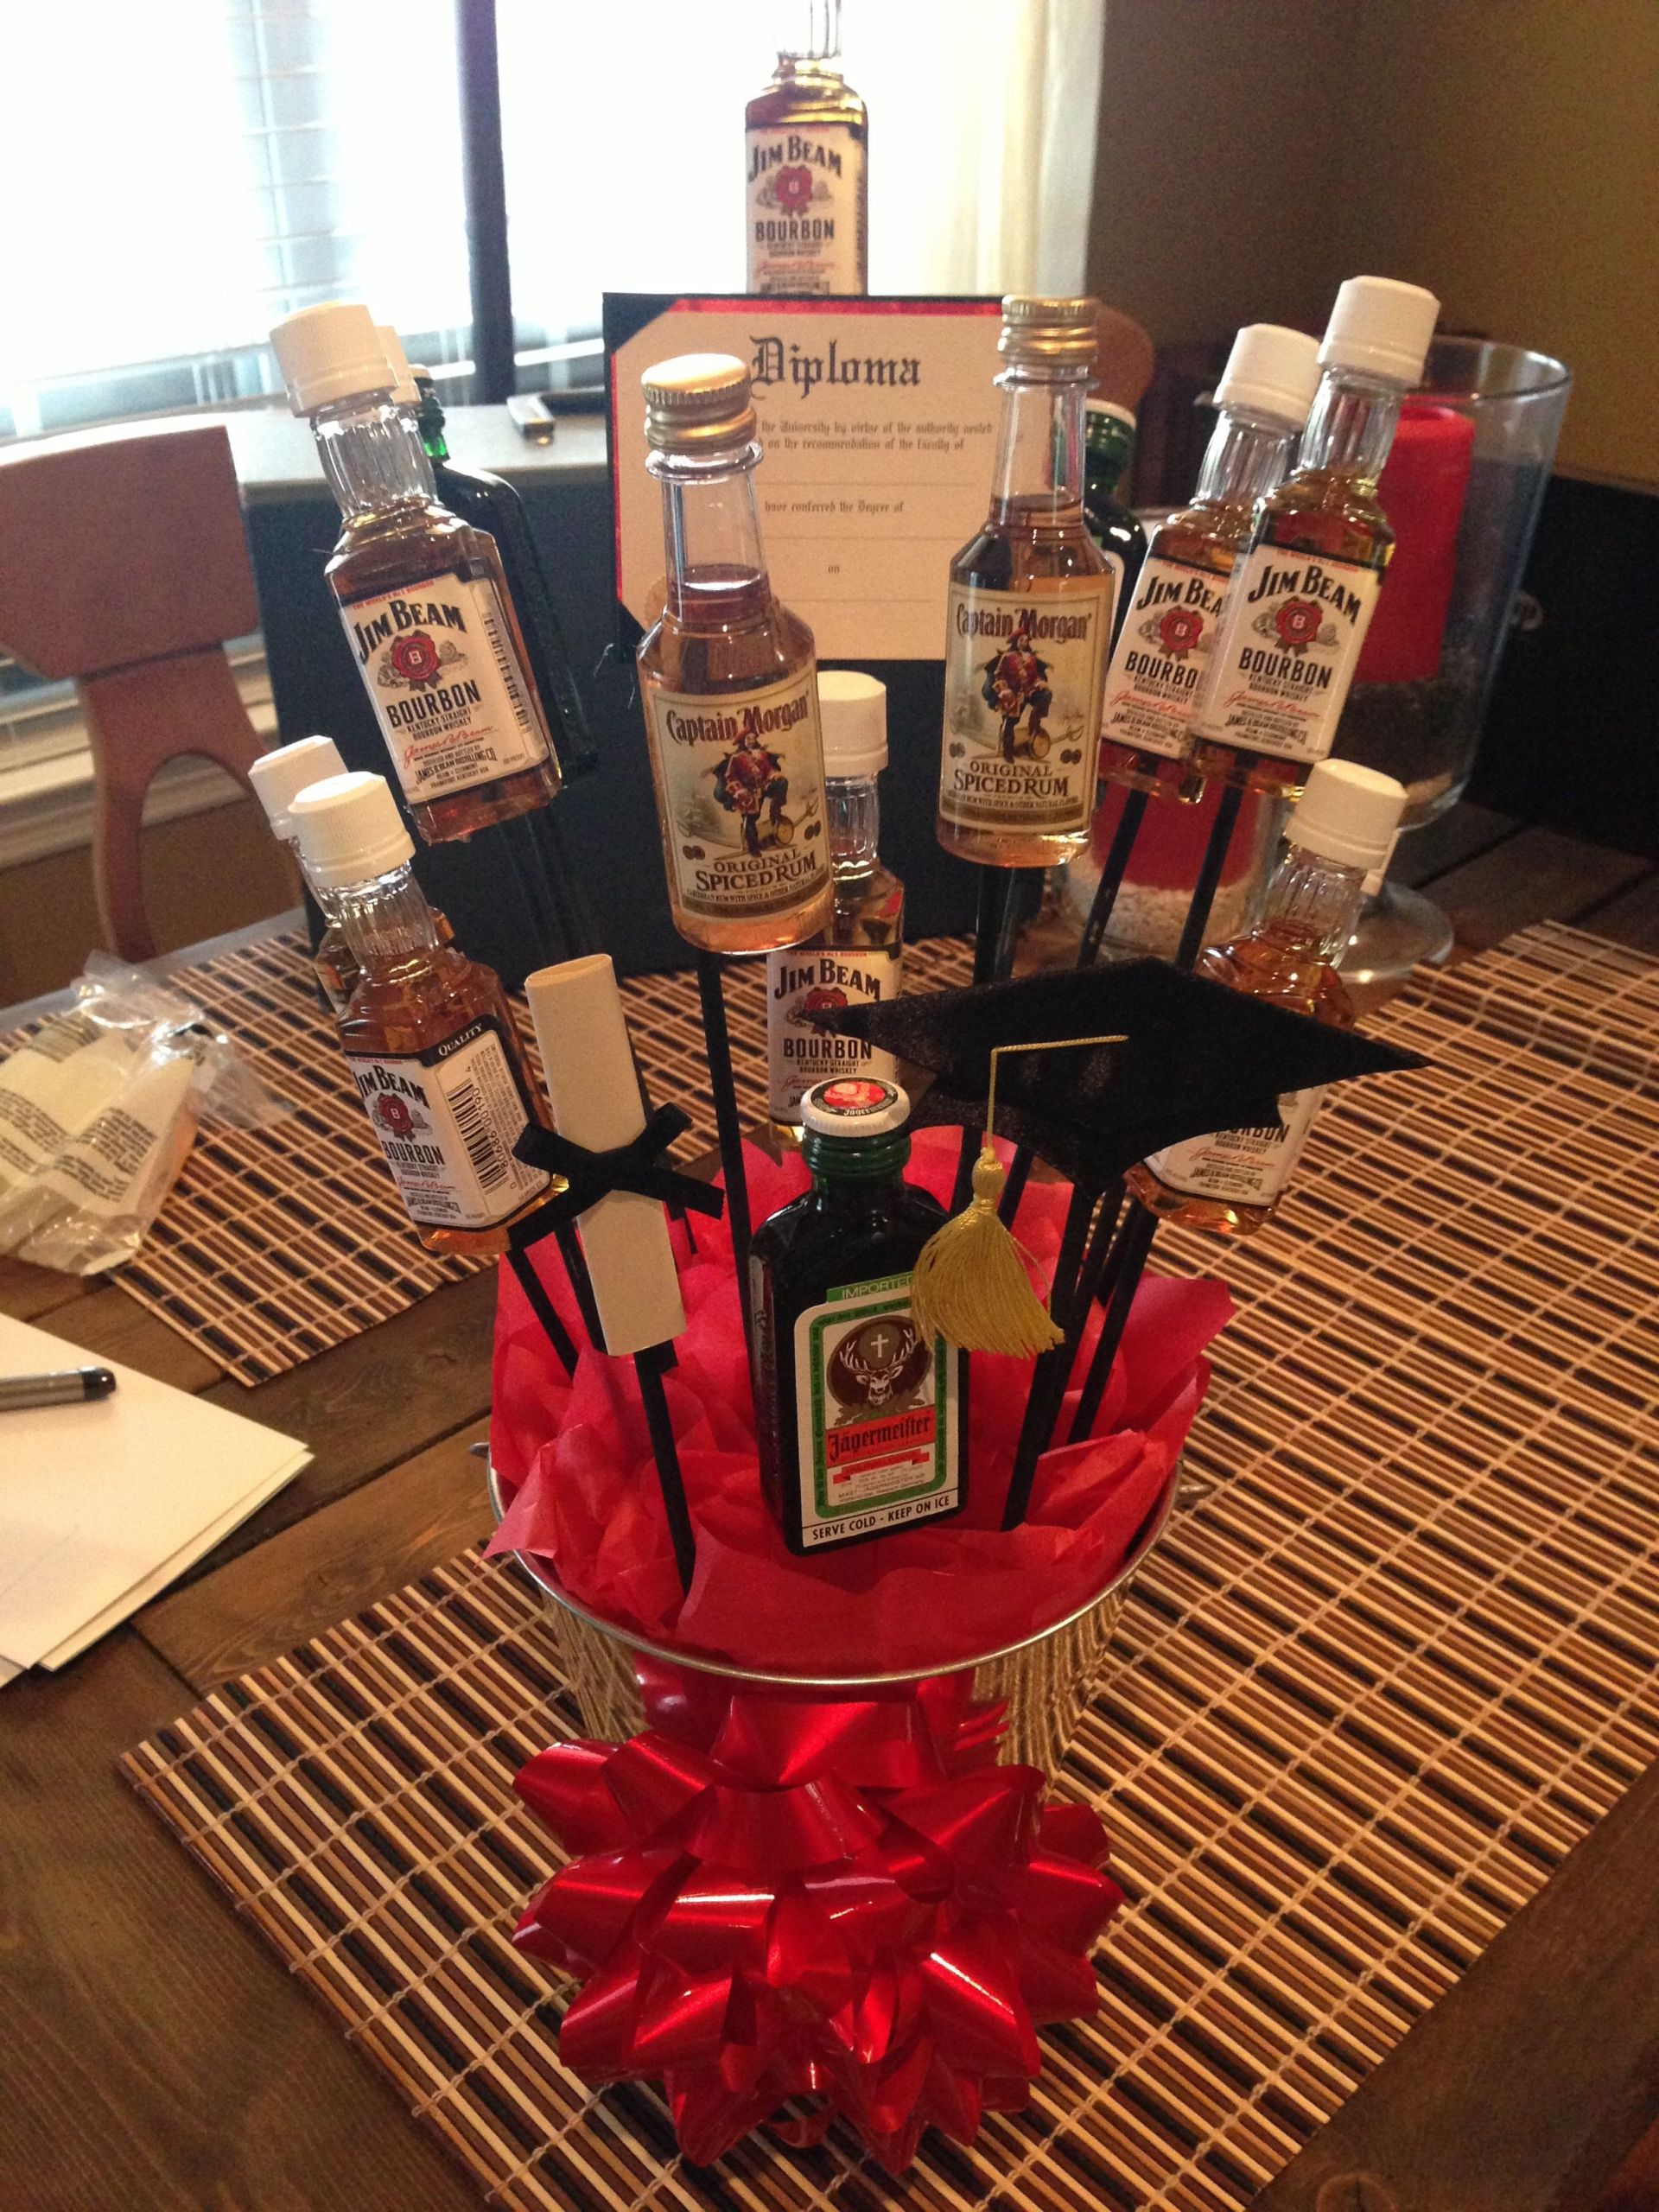 Guy Graduation Gift Ideas
 Alcohol bouquet for a guy graduating college